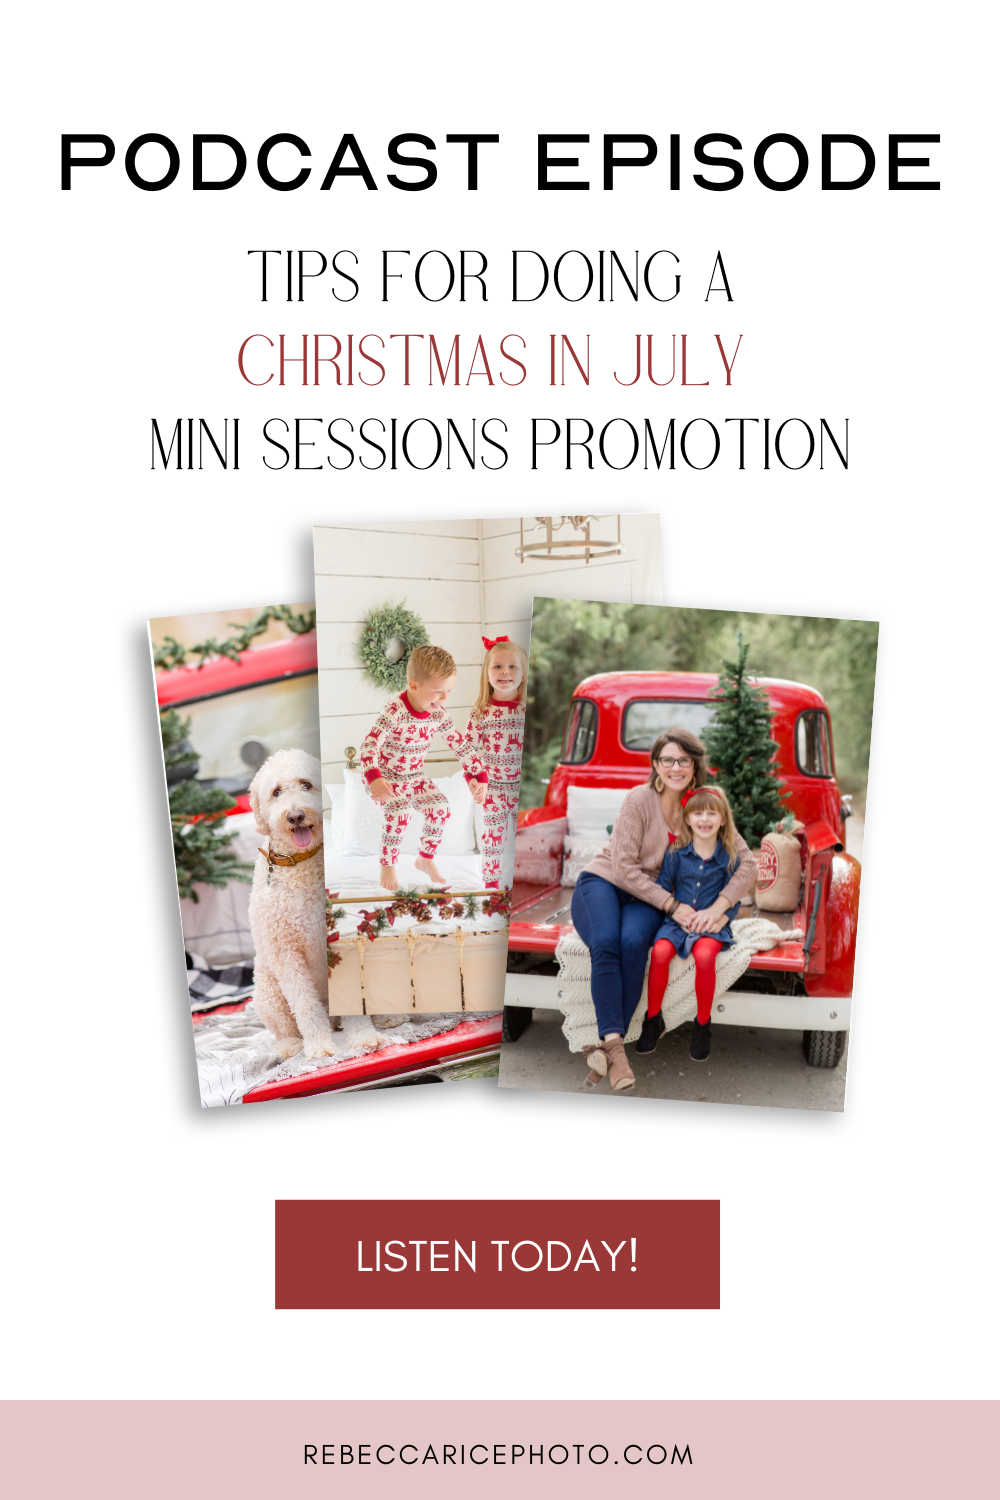 Booking Christmas in July Minis! 5 Reasons You Should Do a 'Christmas in July' Mini Sessions Promotion- Listen to the Podcast Now!! - rebeccaricephoto.com